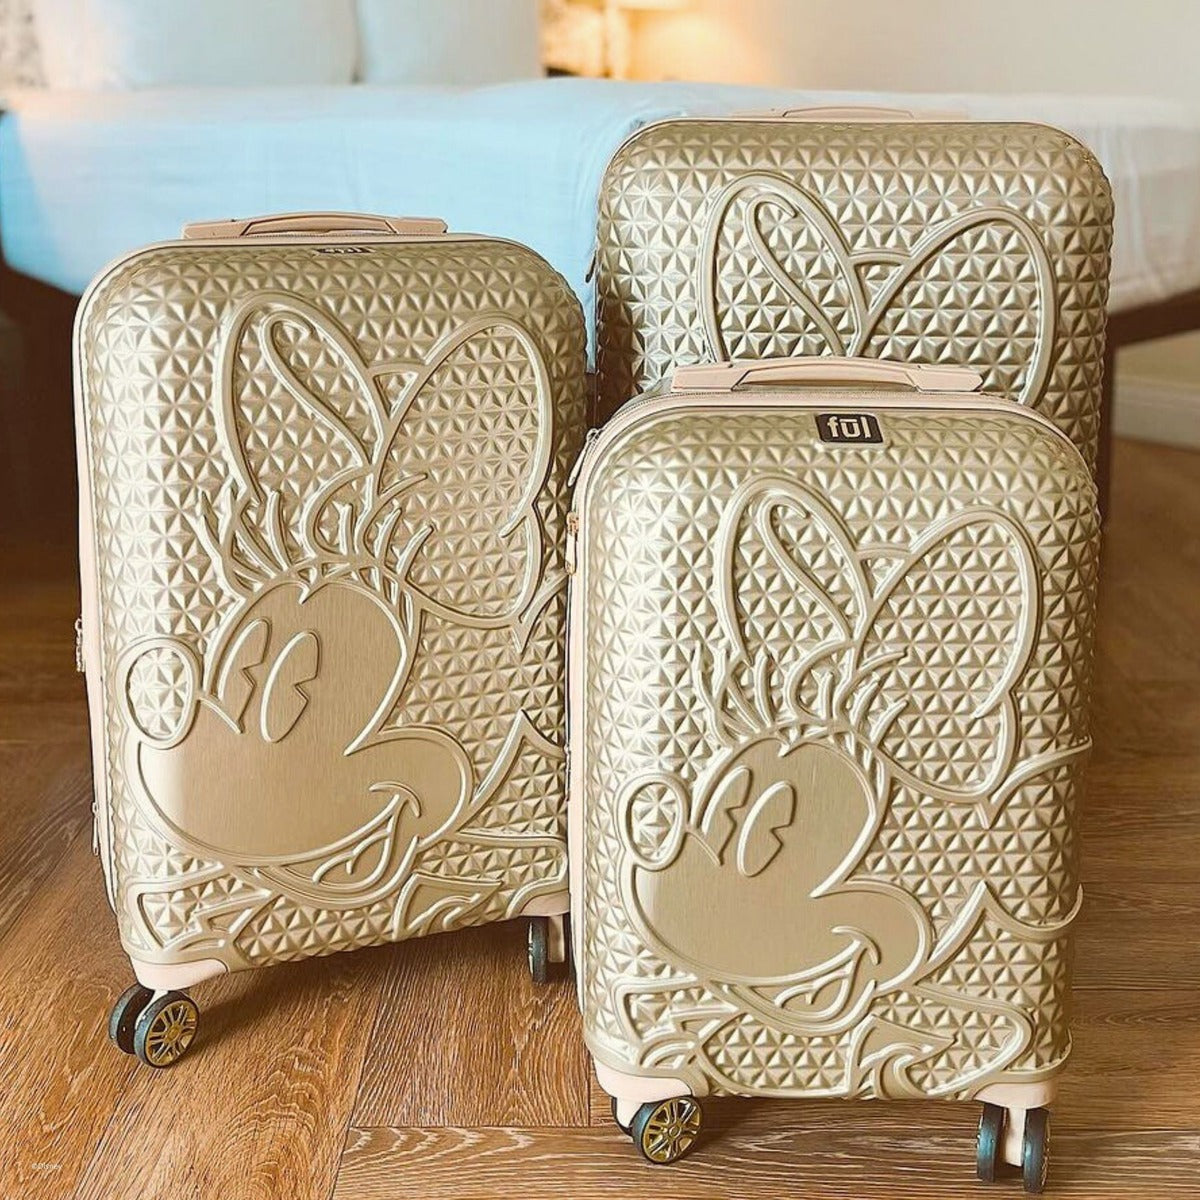 Taupe Ful Disney Minnie Mouse rolling luggage 3 piece set - best suitcases for traveling